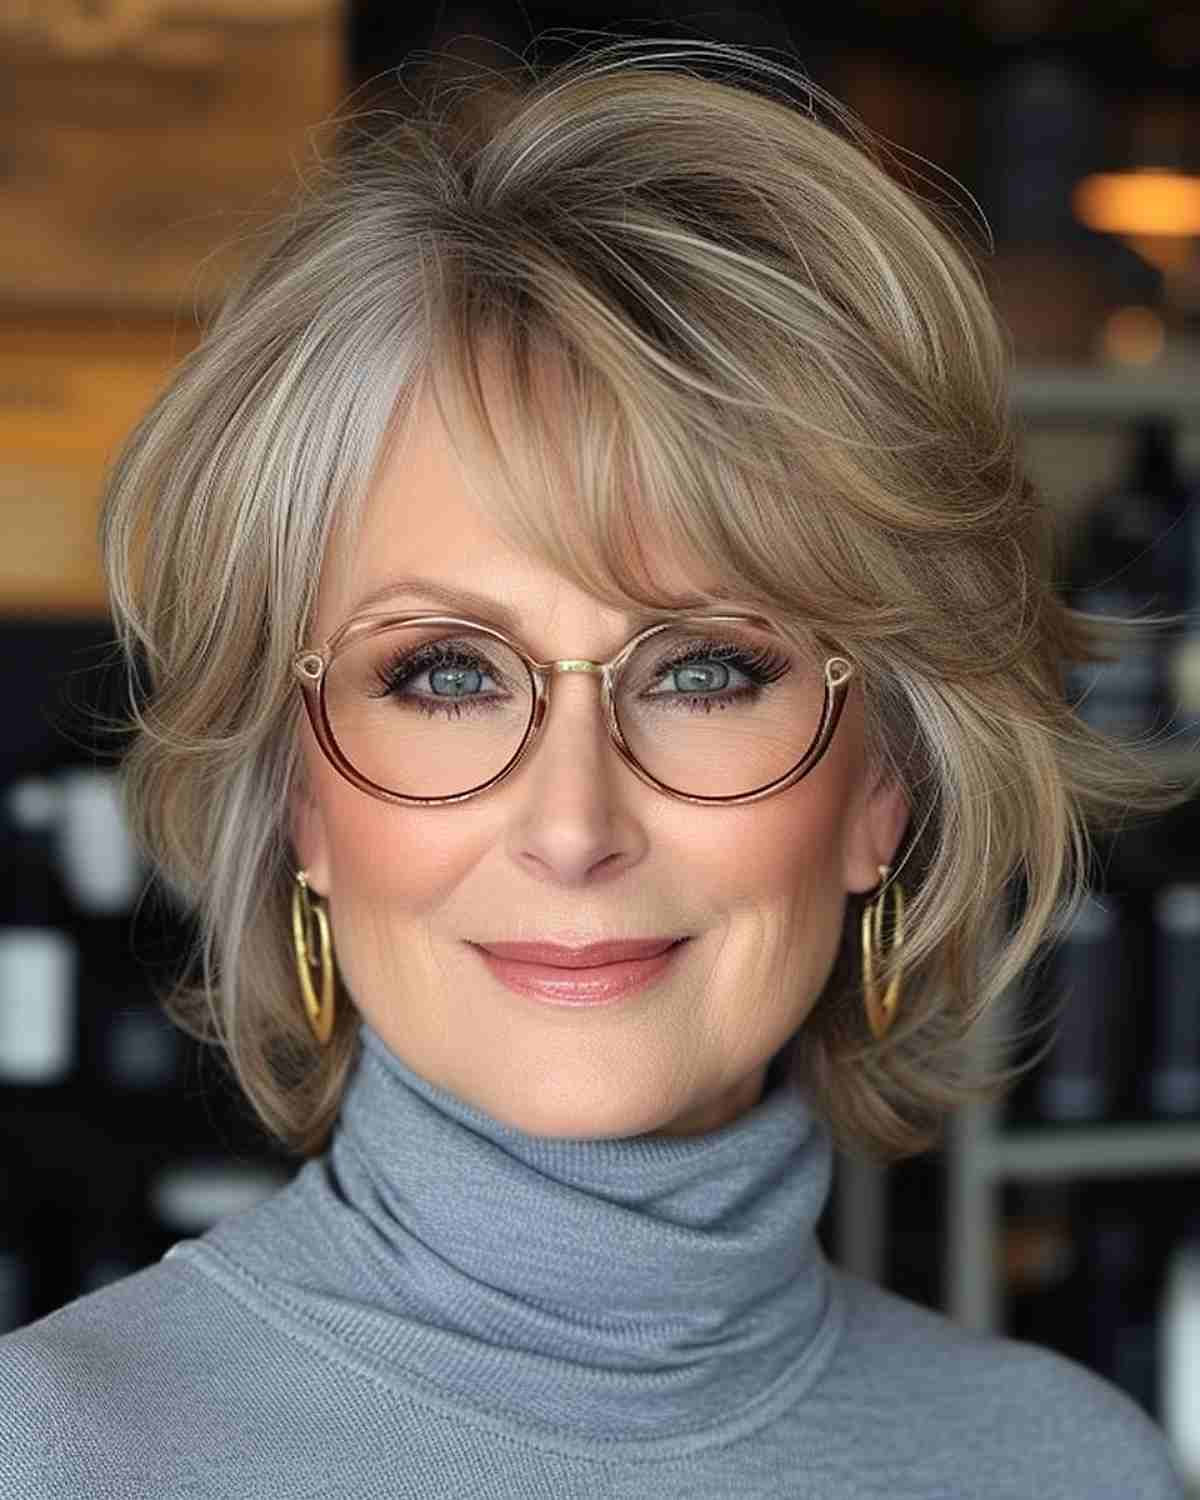 Mature woman with stylish chin-length silver shag haircut and glasses